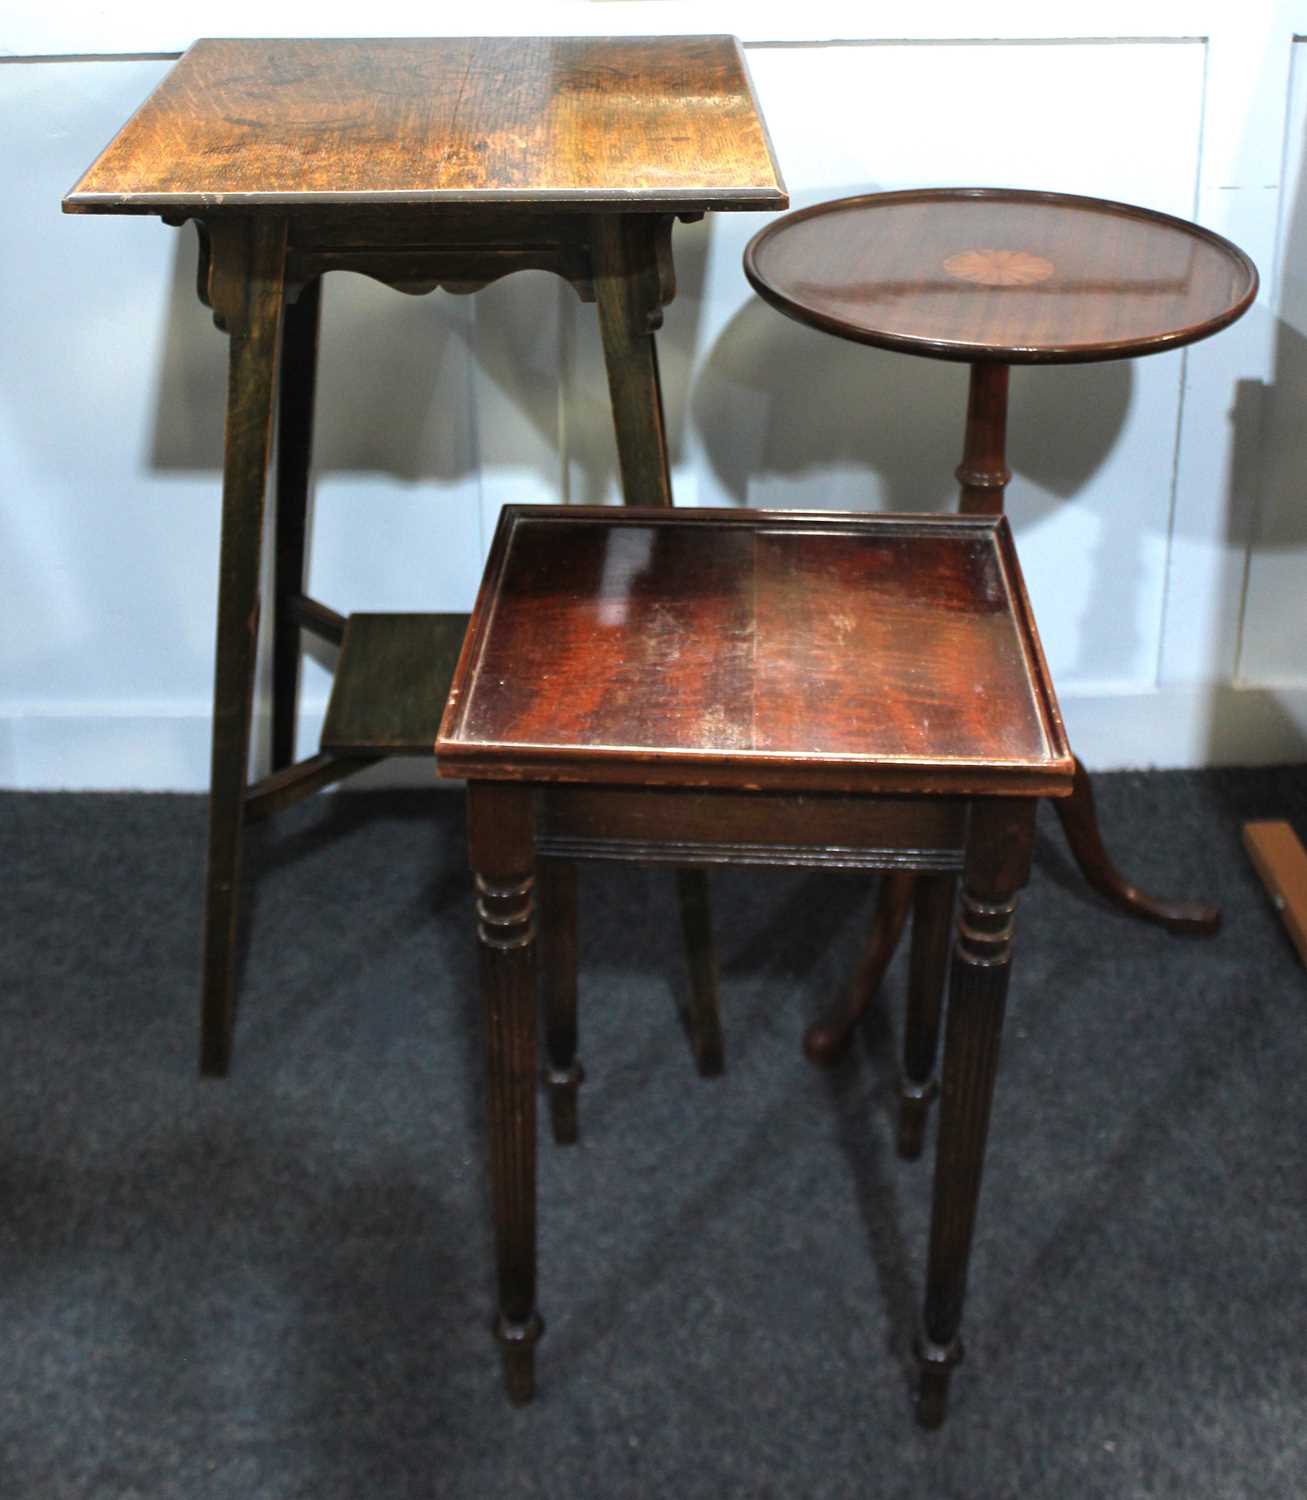 An Edwardian mahogany inlaid tripod table, the dished circular top with central batwing patera 36.